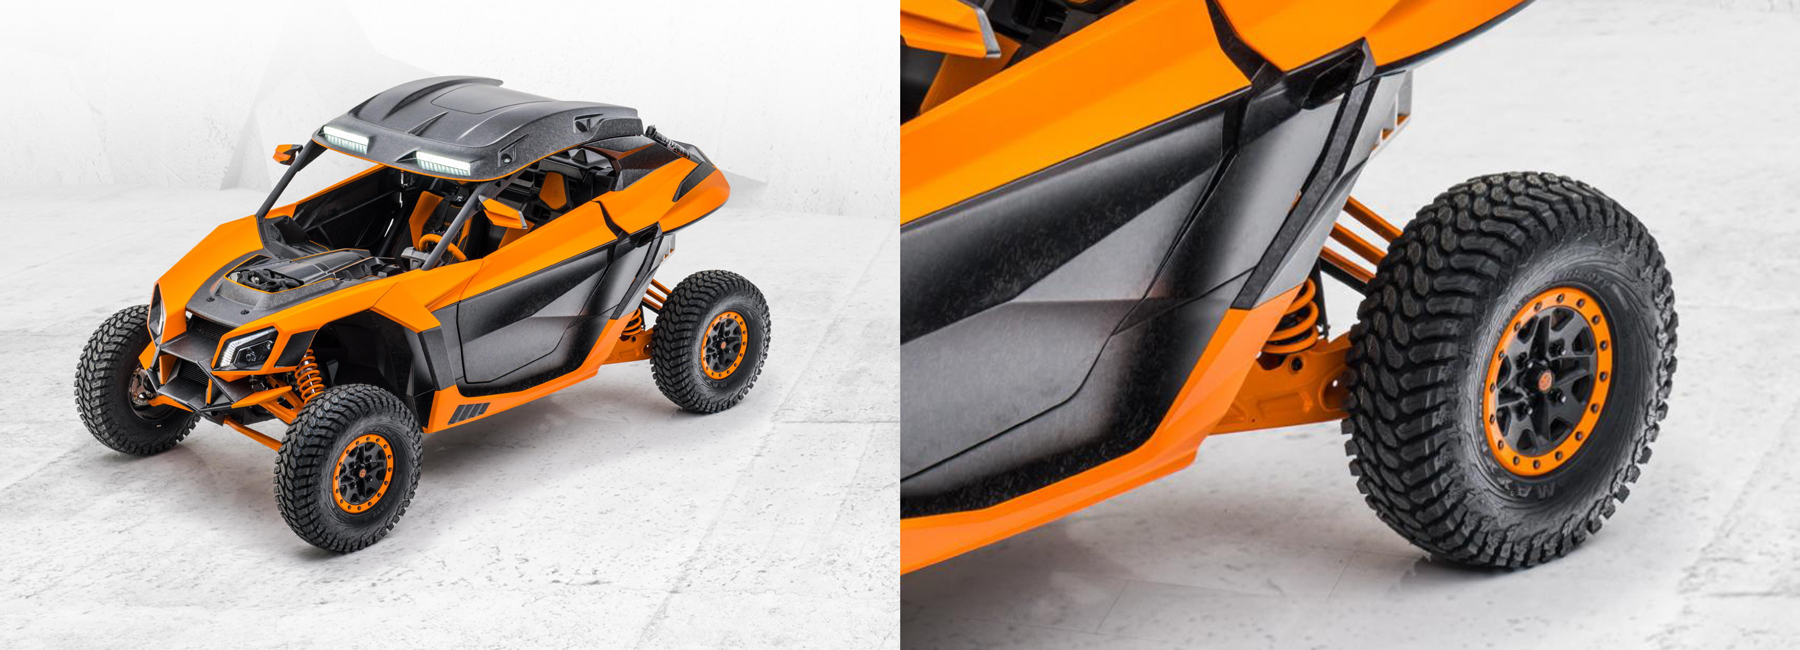 Mansory S Xerocole Is A Bright Orange Off Roader Built For Tough Terrain